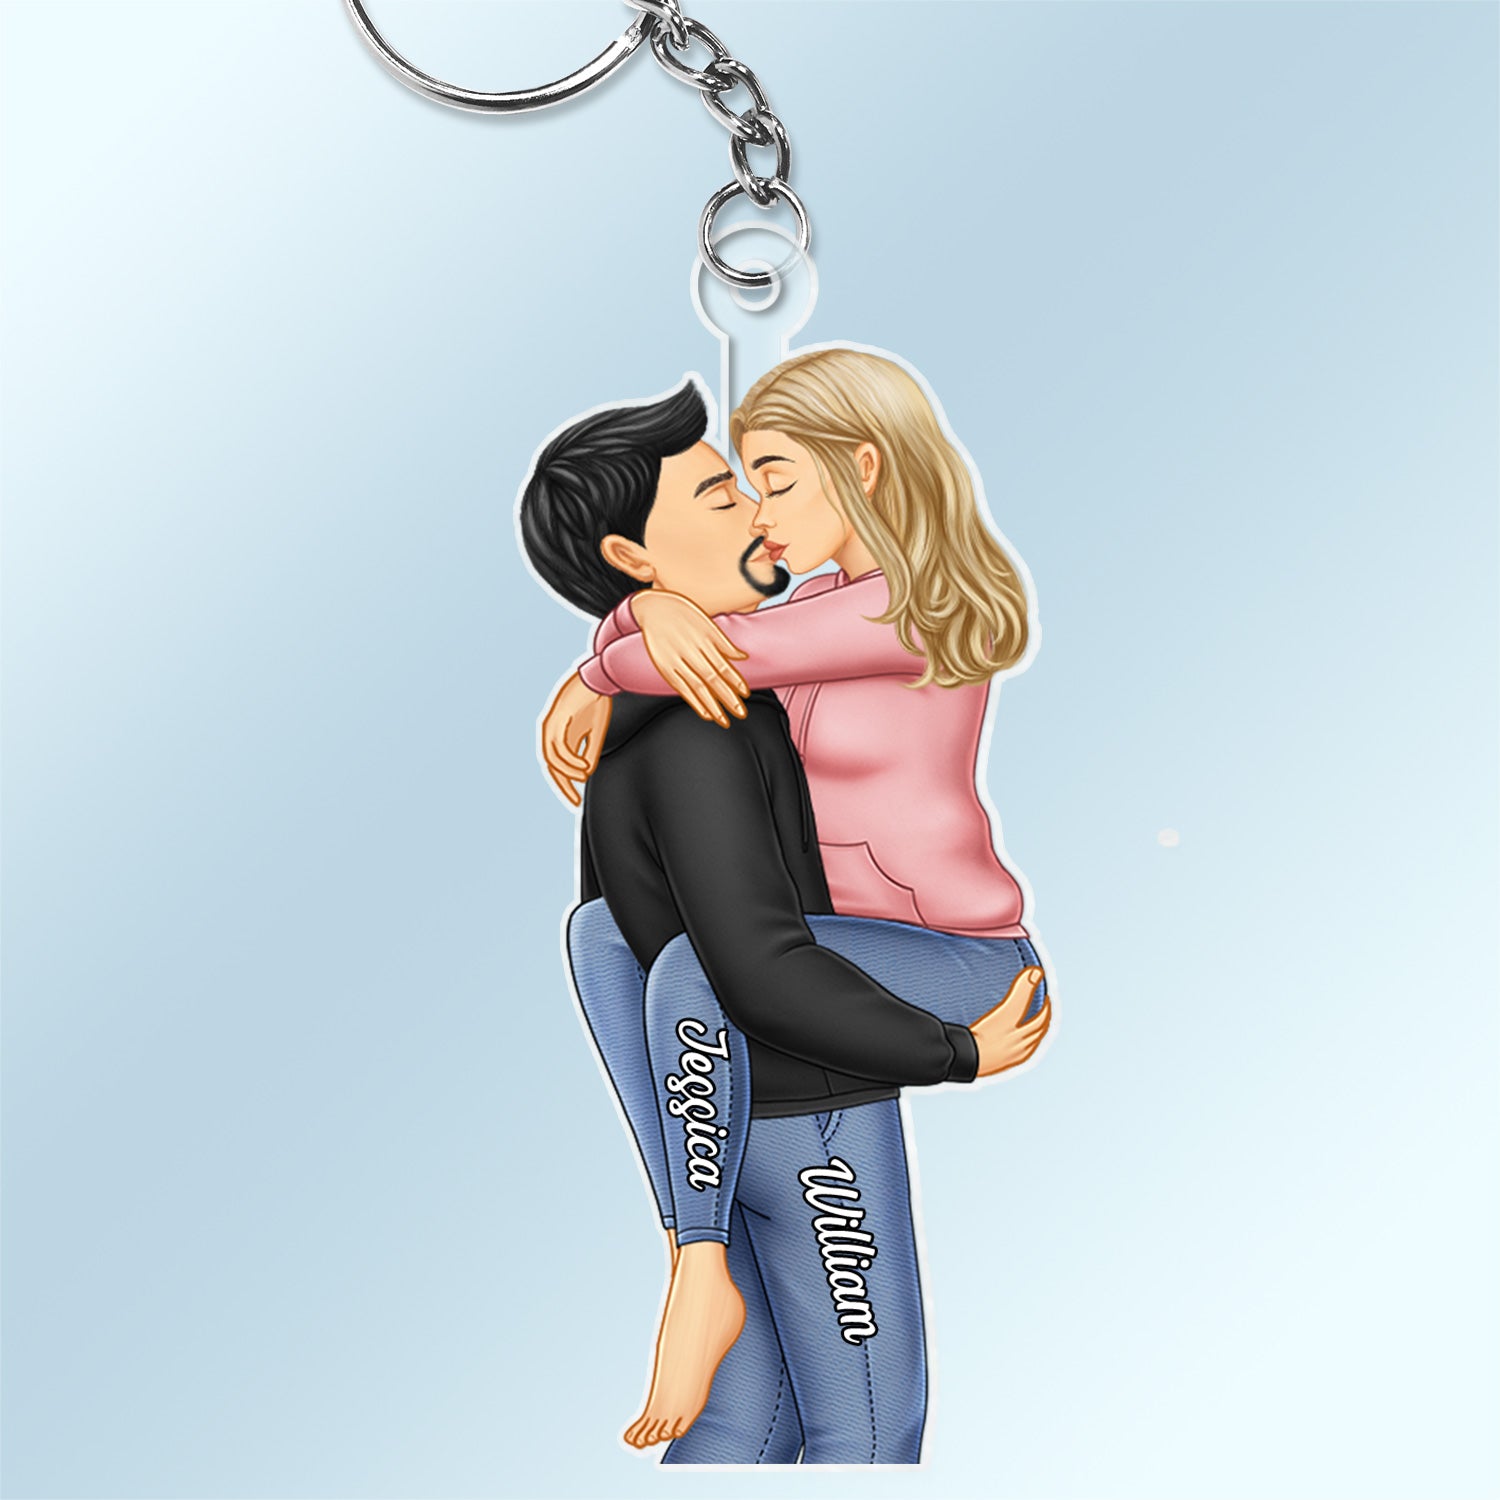 Couple Kissing - Anniversary Gift For Couples - Personalized Cutout Acrylic Keychain